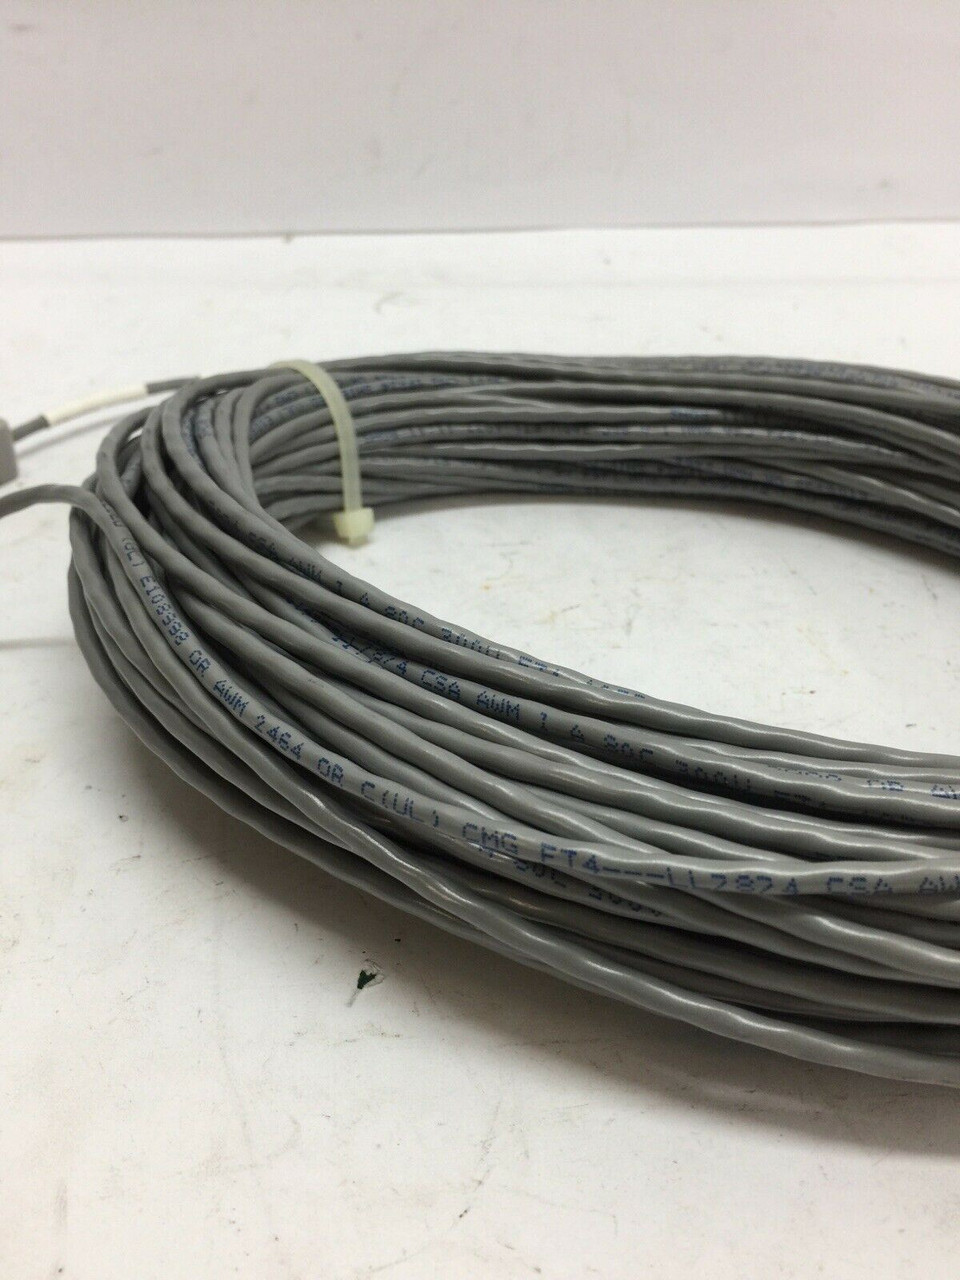 Electrical Special Purpose Cable Assembly 112F009776-21 Belden Shielded Wire